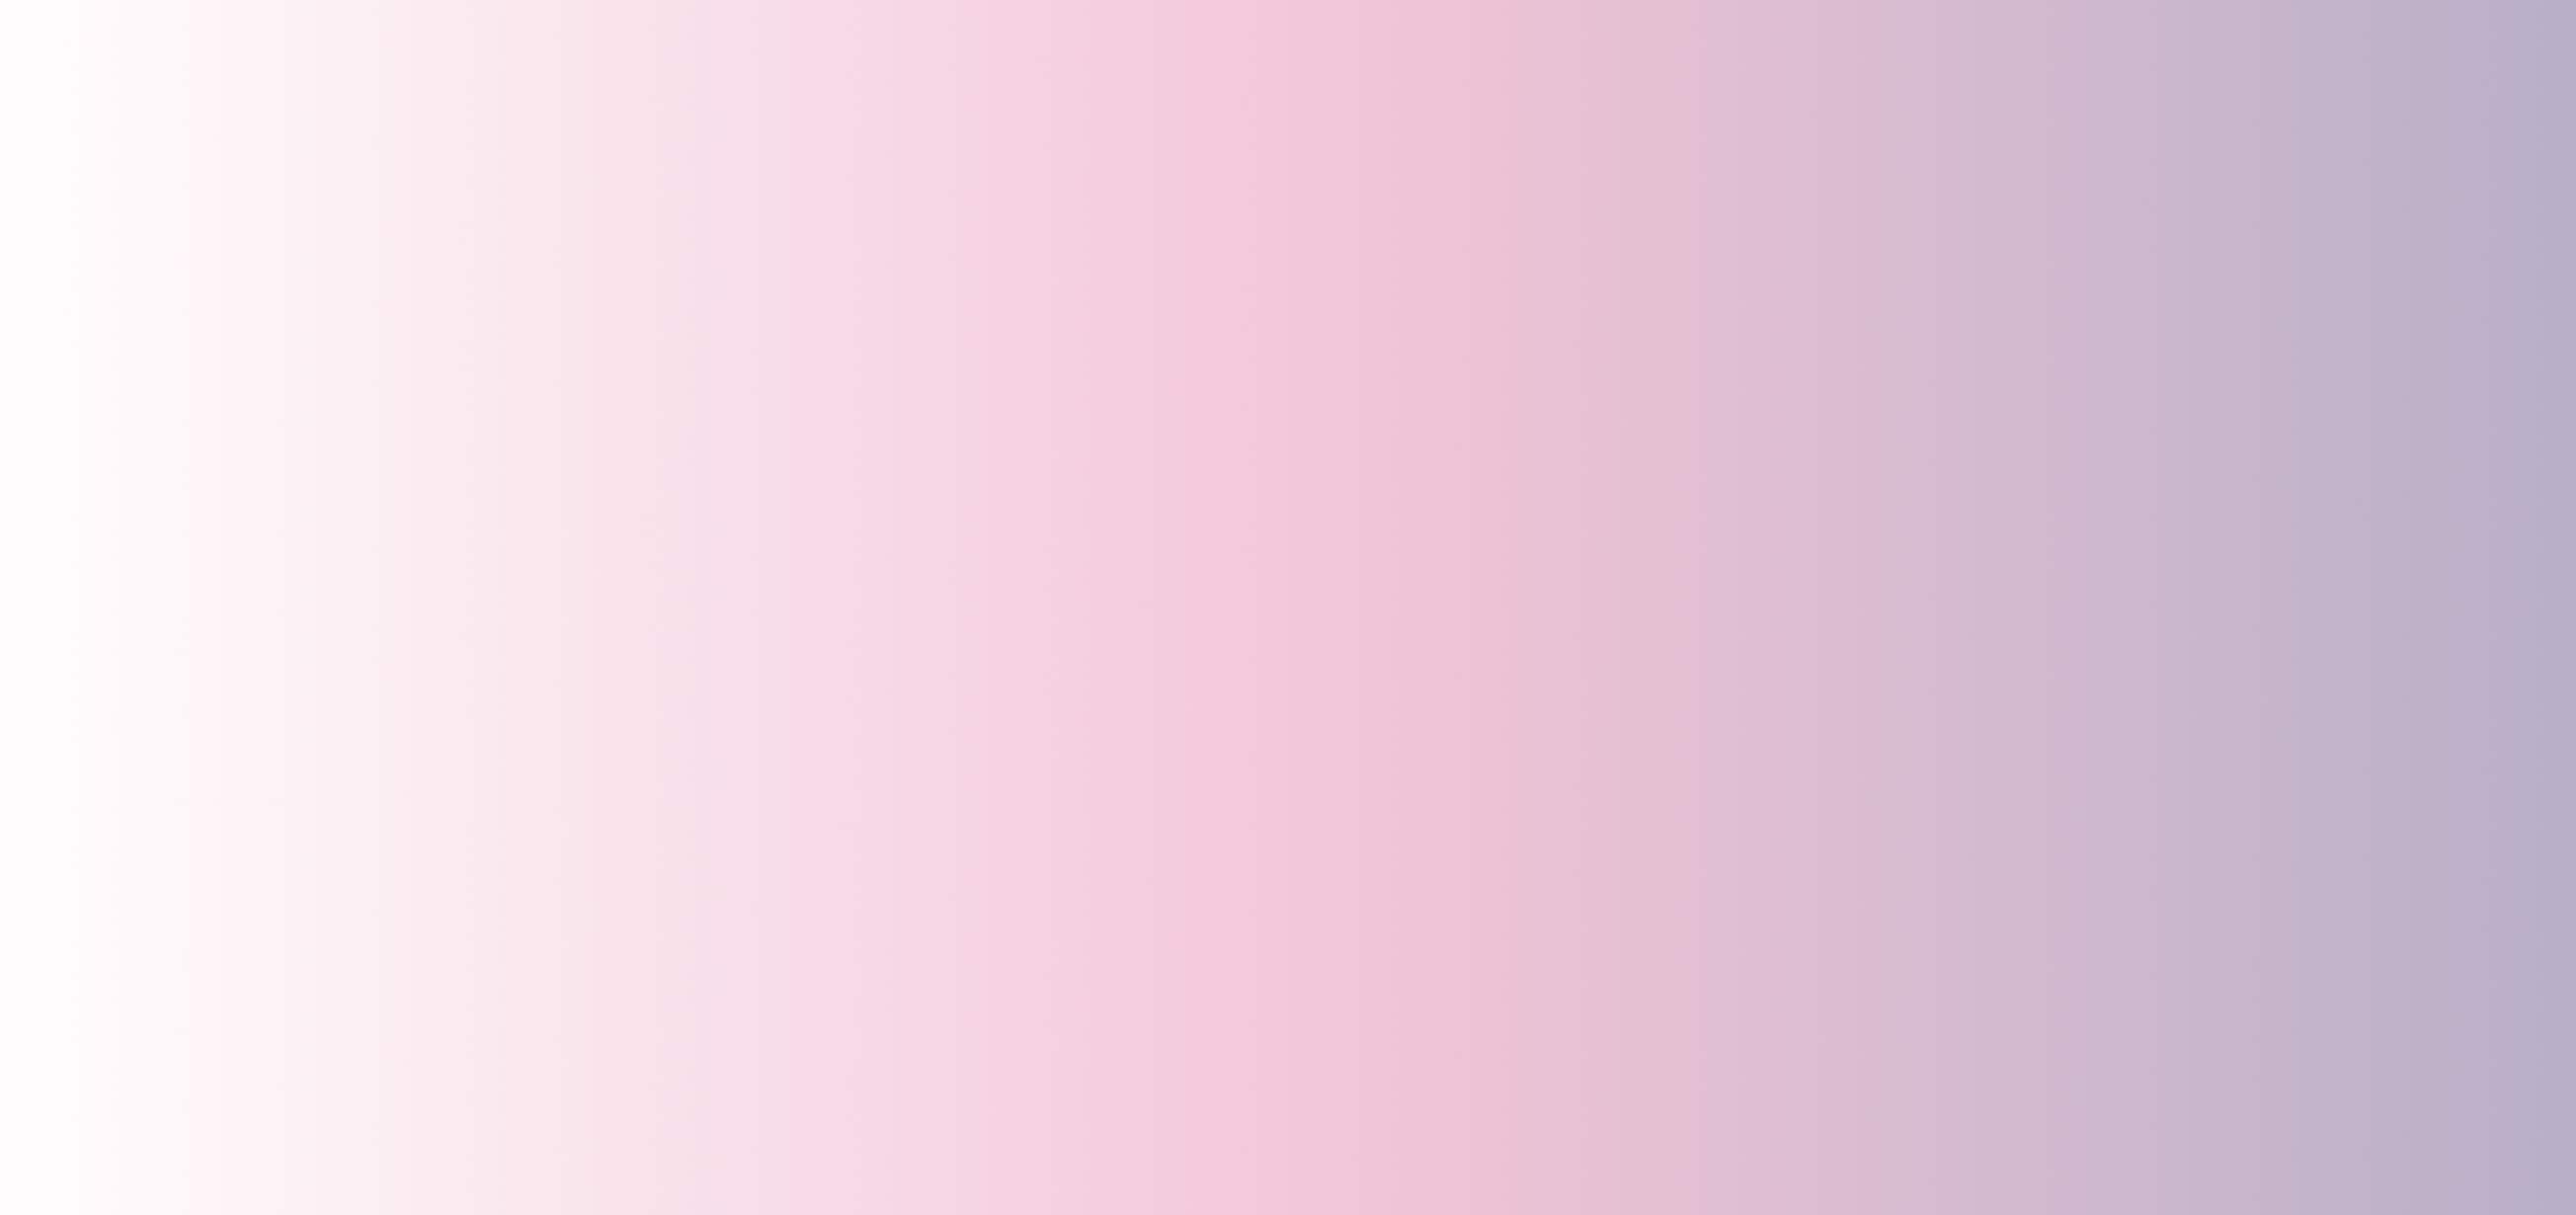 Pink and purple ombre background gradient